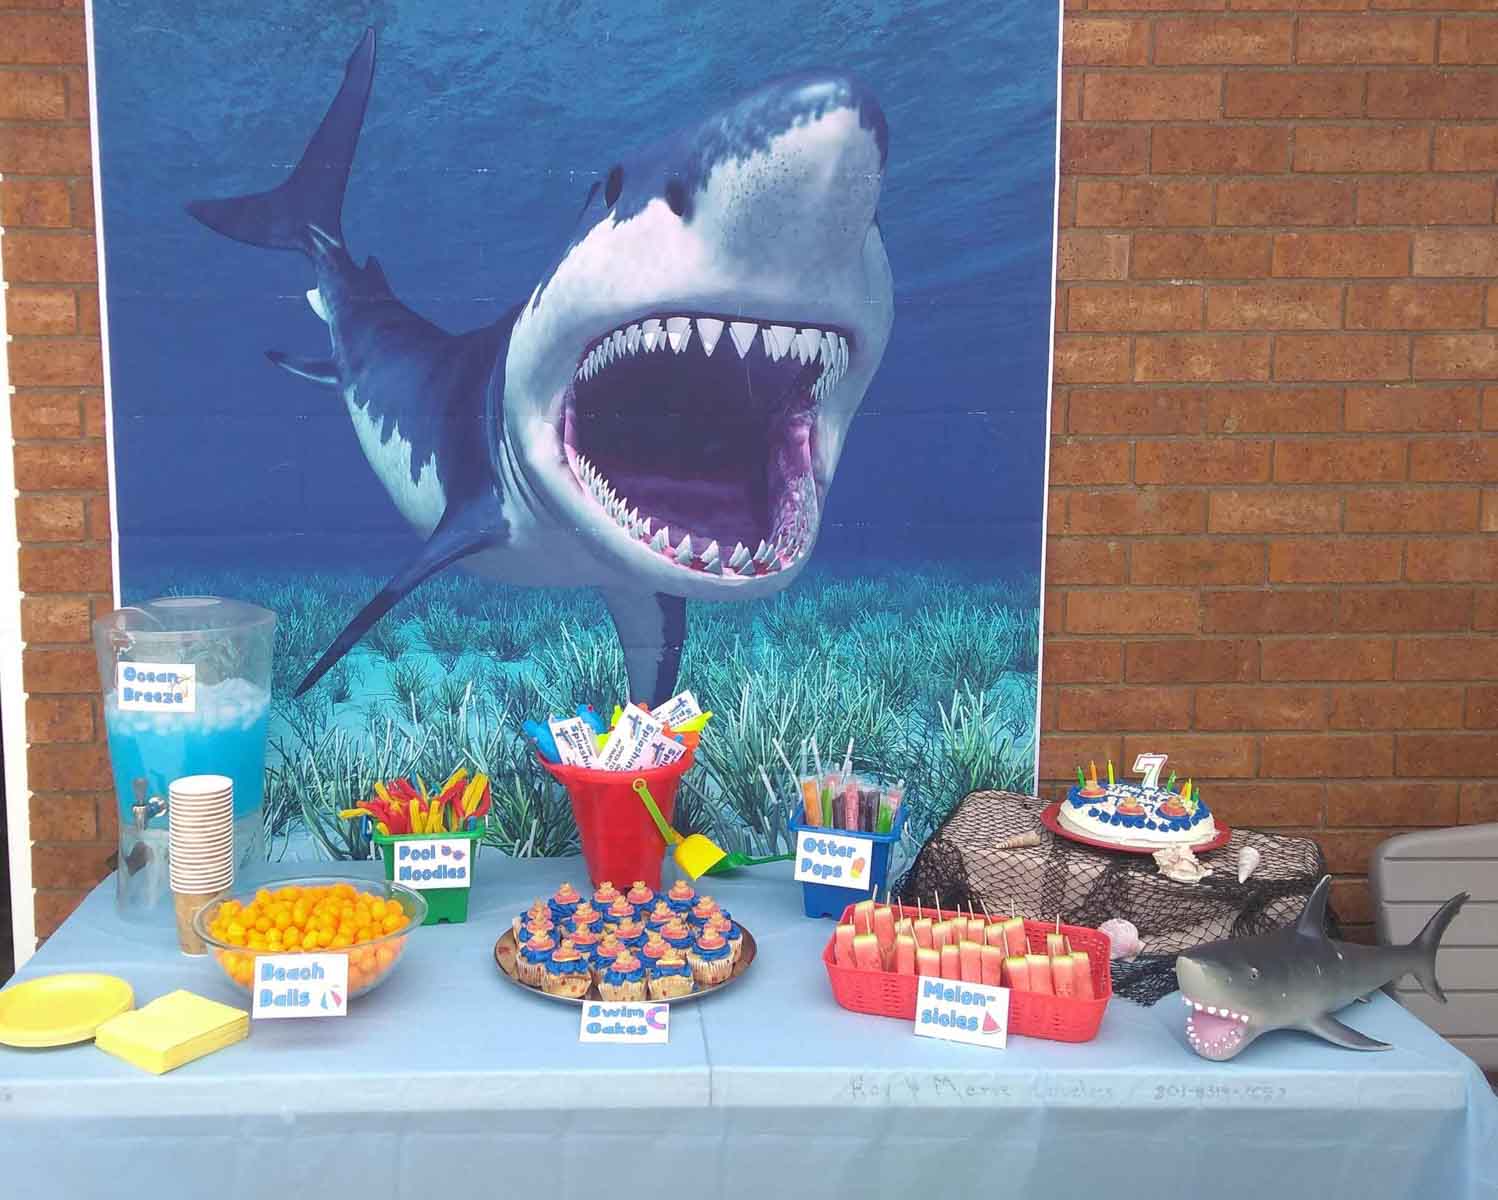 big shark poster in front of a pool party table